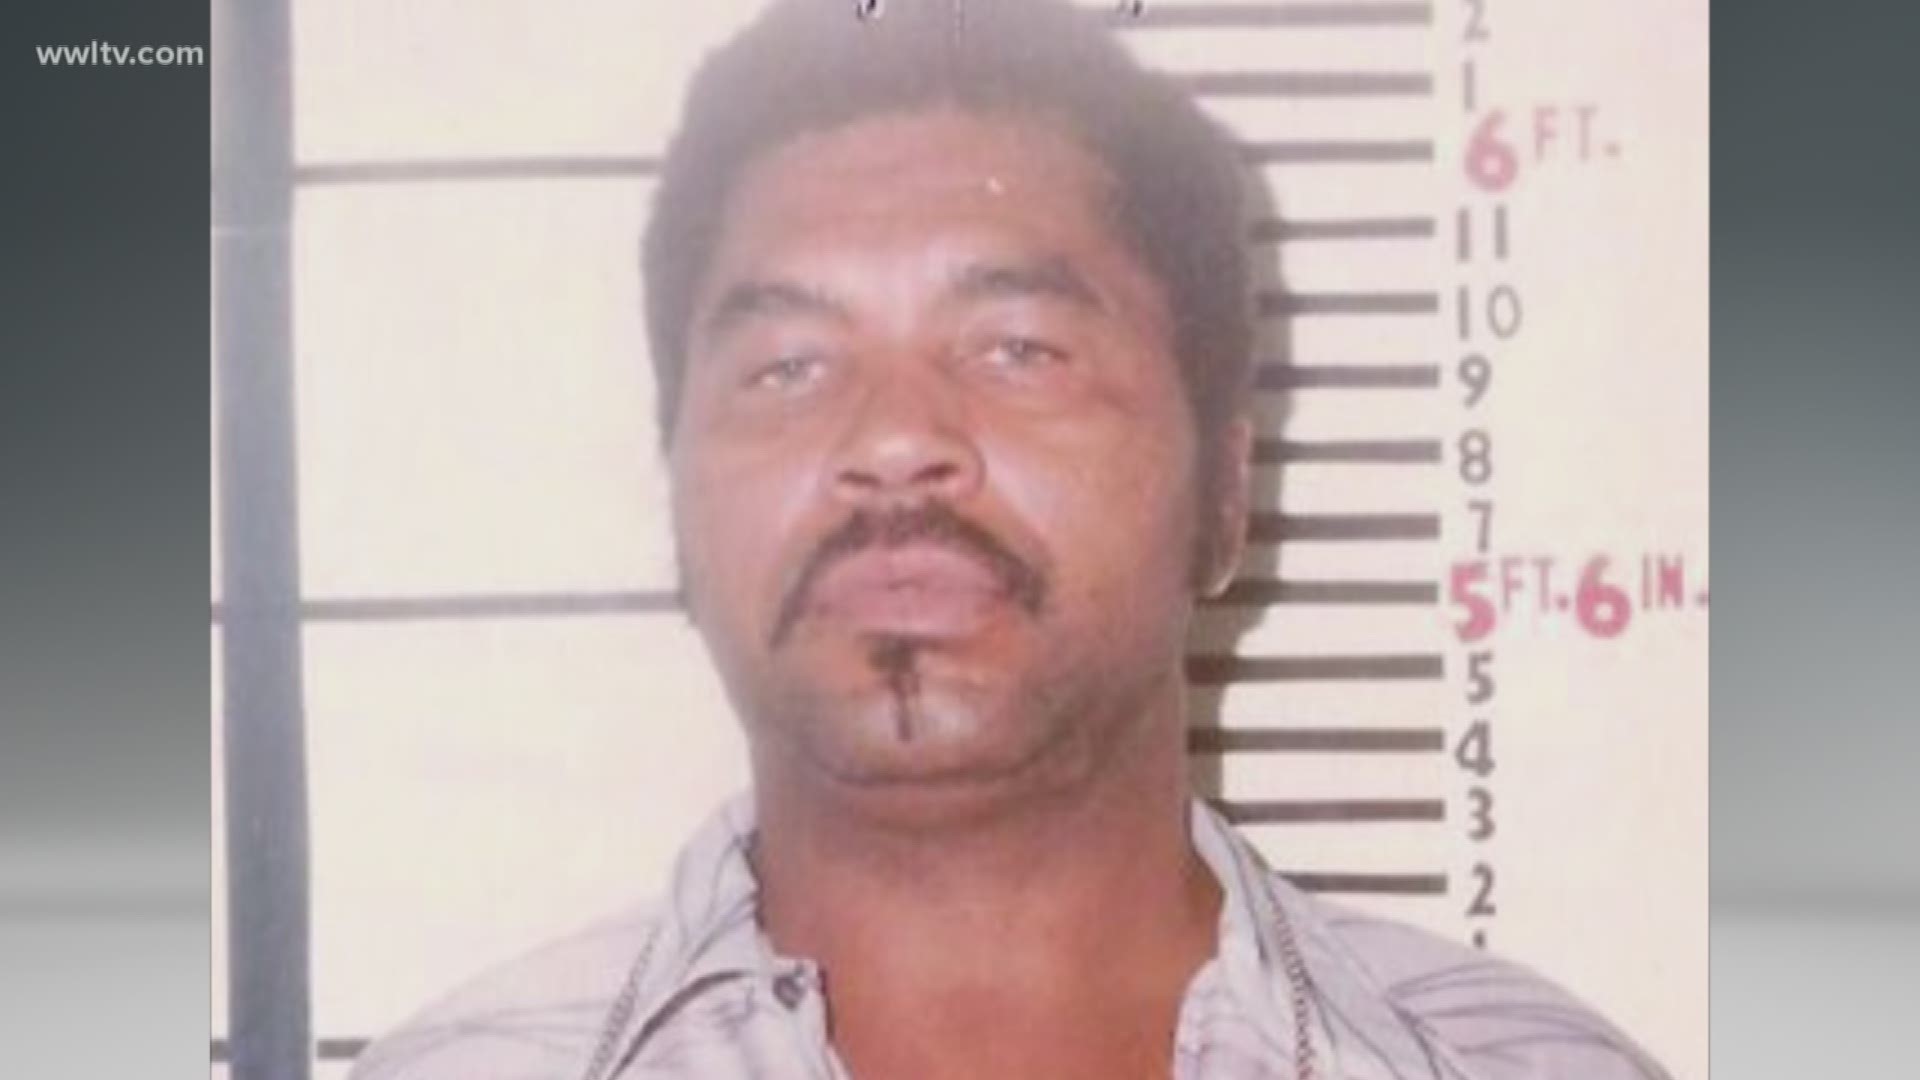 Samuel Little, a man suspected in up to 90 unsolved killings, is now the suspect in two decades-old, unsolved killings in the Houma area.